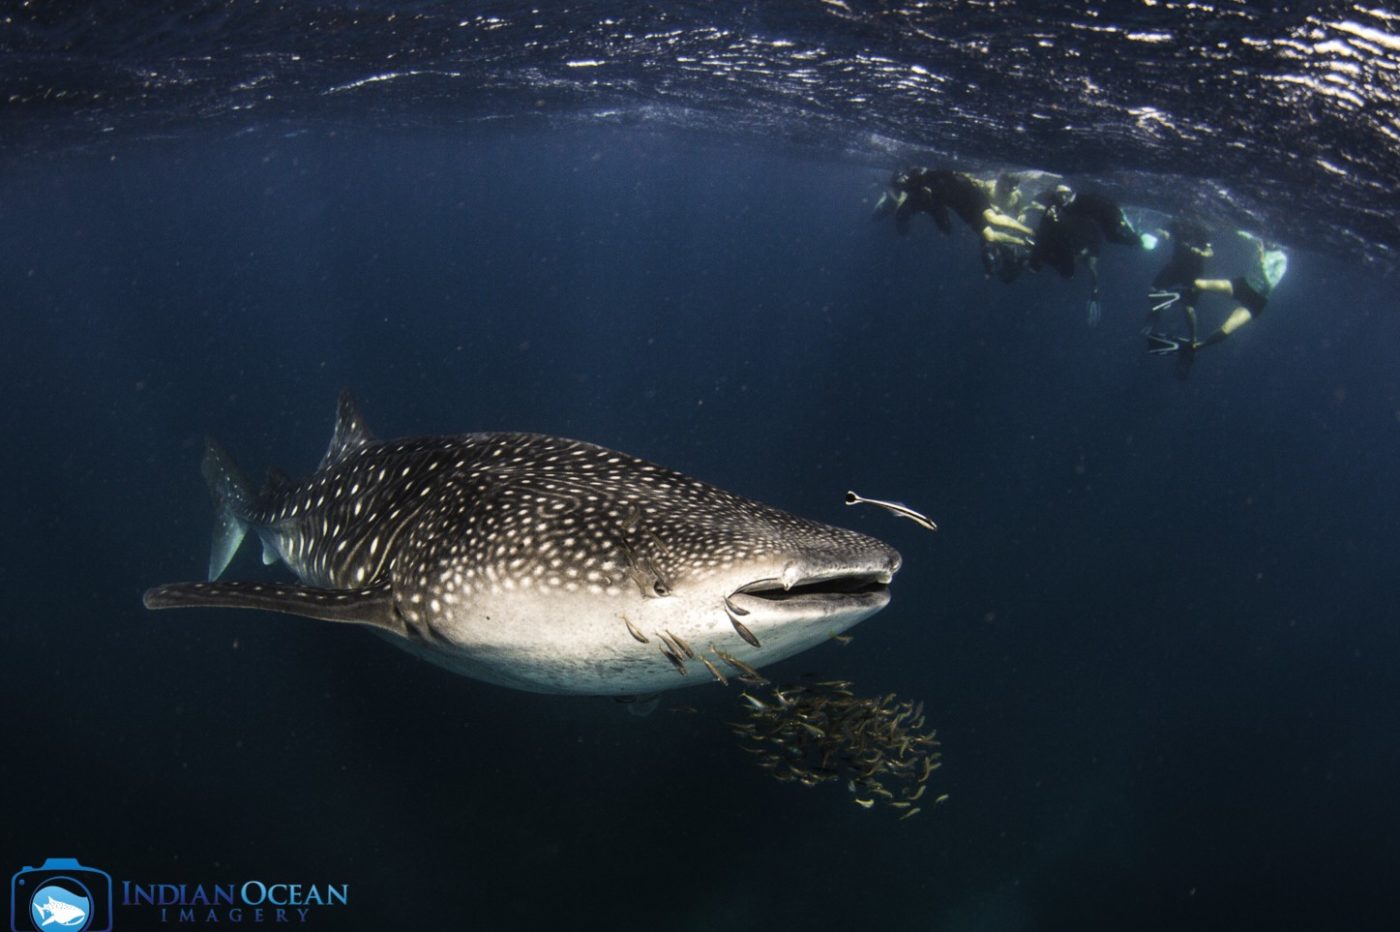 whaleshark by Indian Ocean Imagery courtesy of Kings Ningaloo Reef Tour